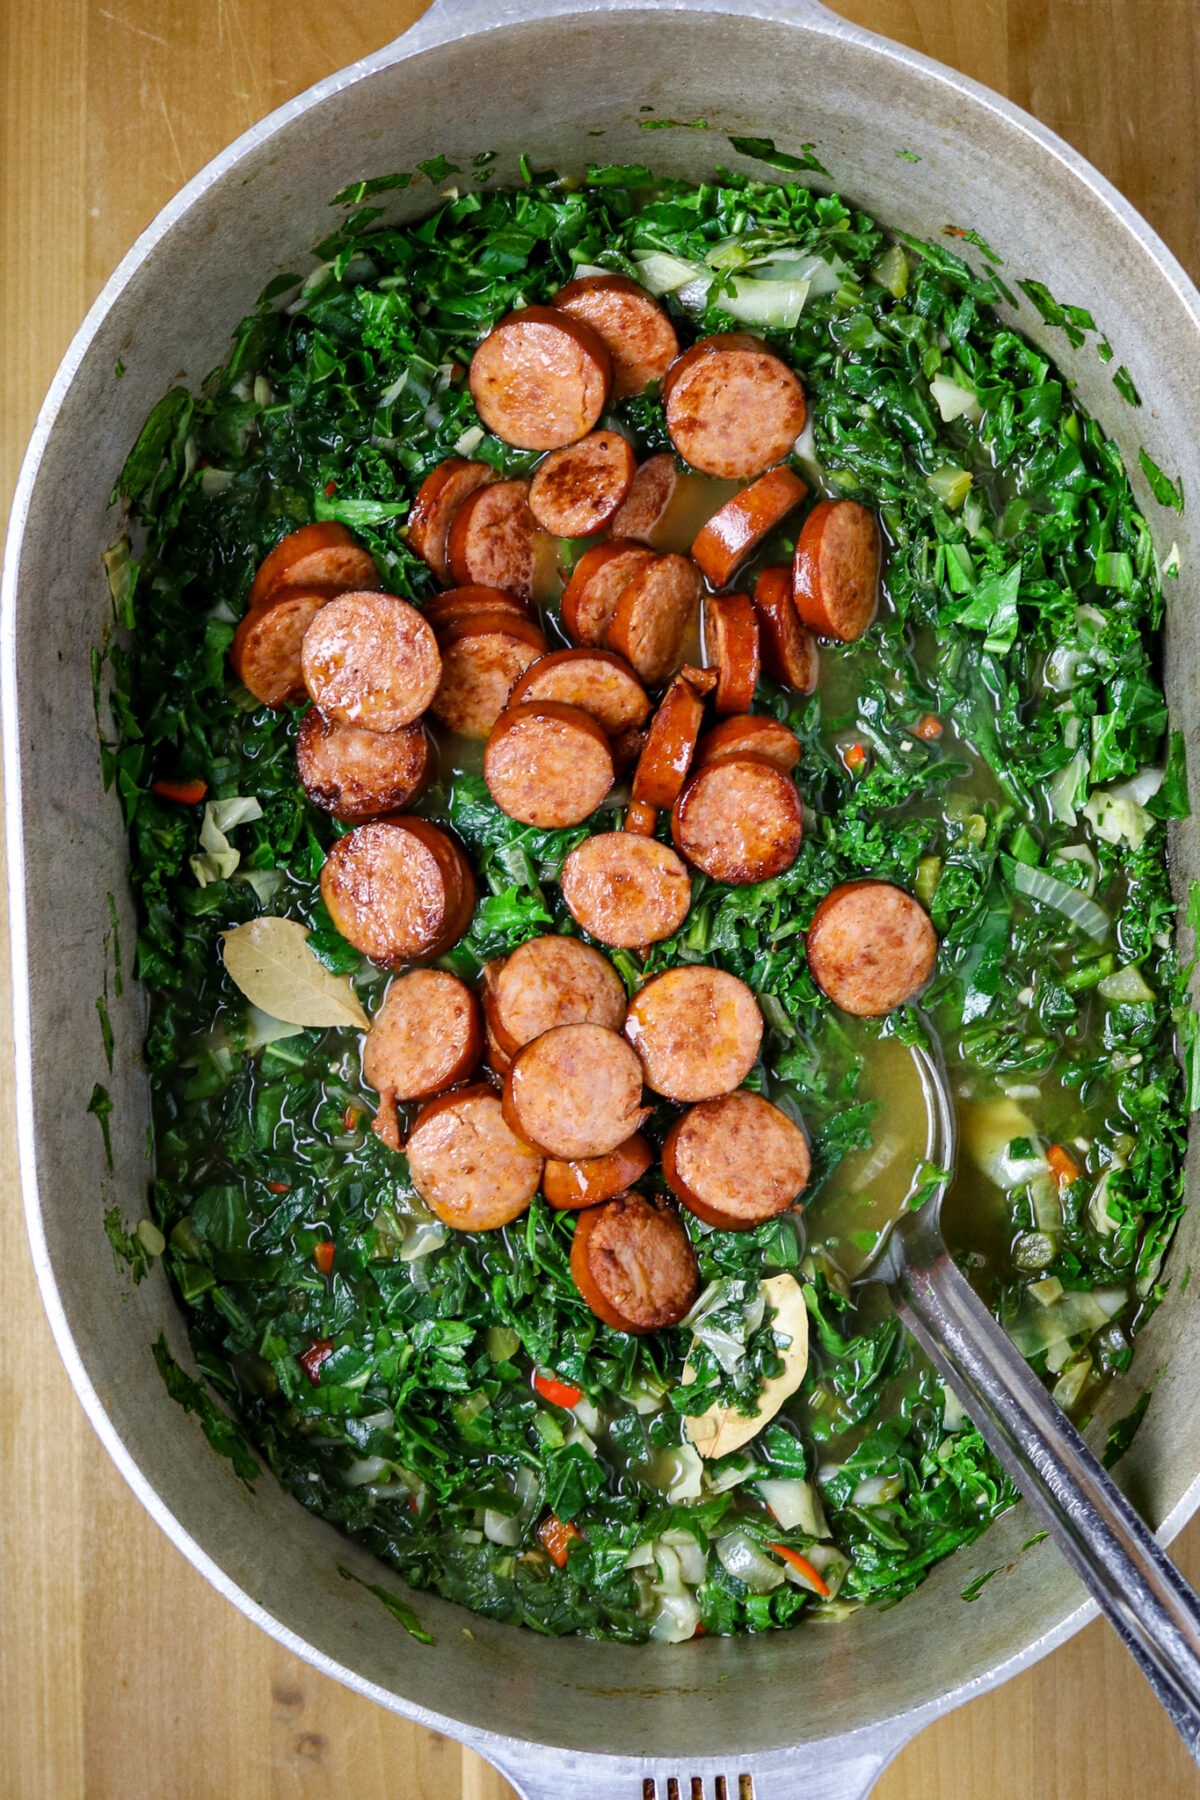 A large pot of green gumbo with slices of sausage laying on top of it.